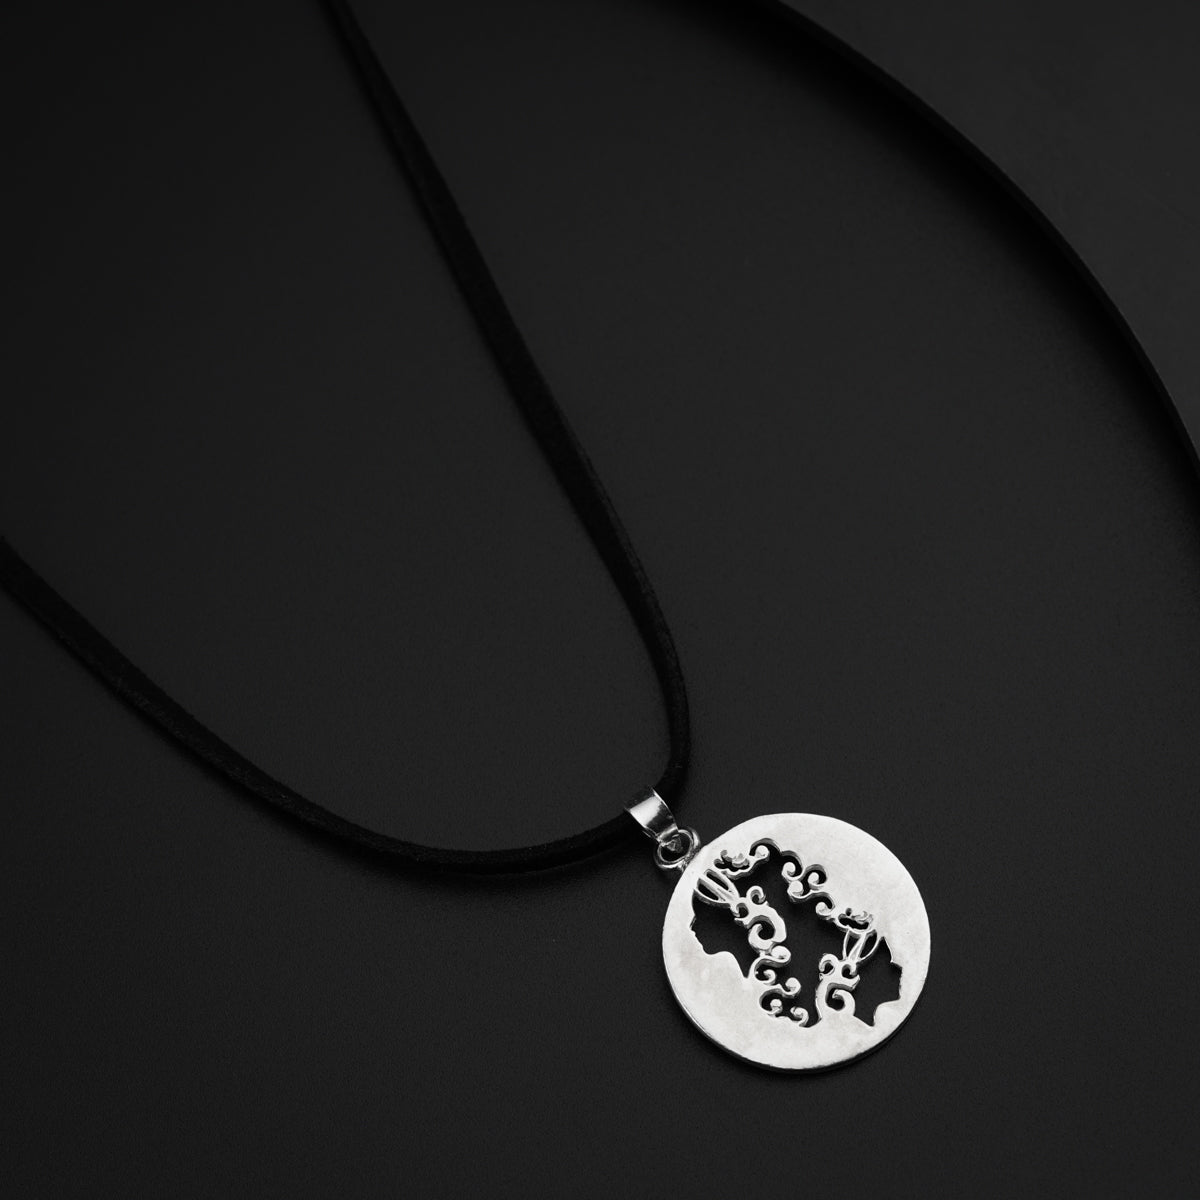 a black and white photo of a pendant on a black background